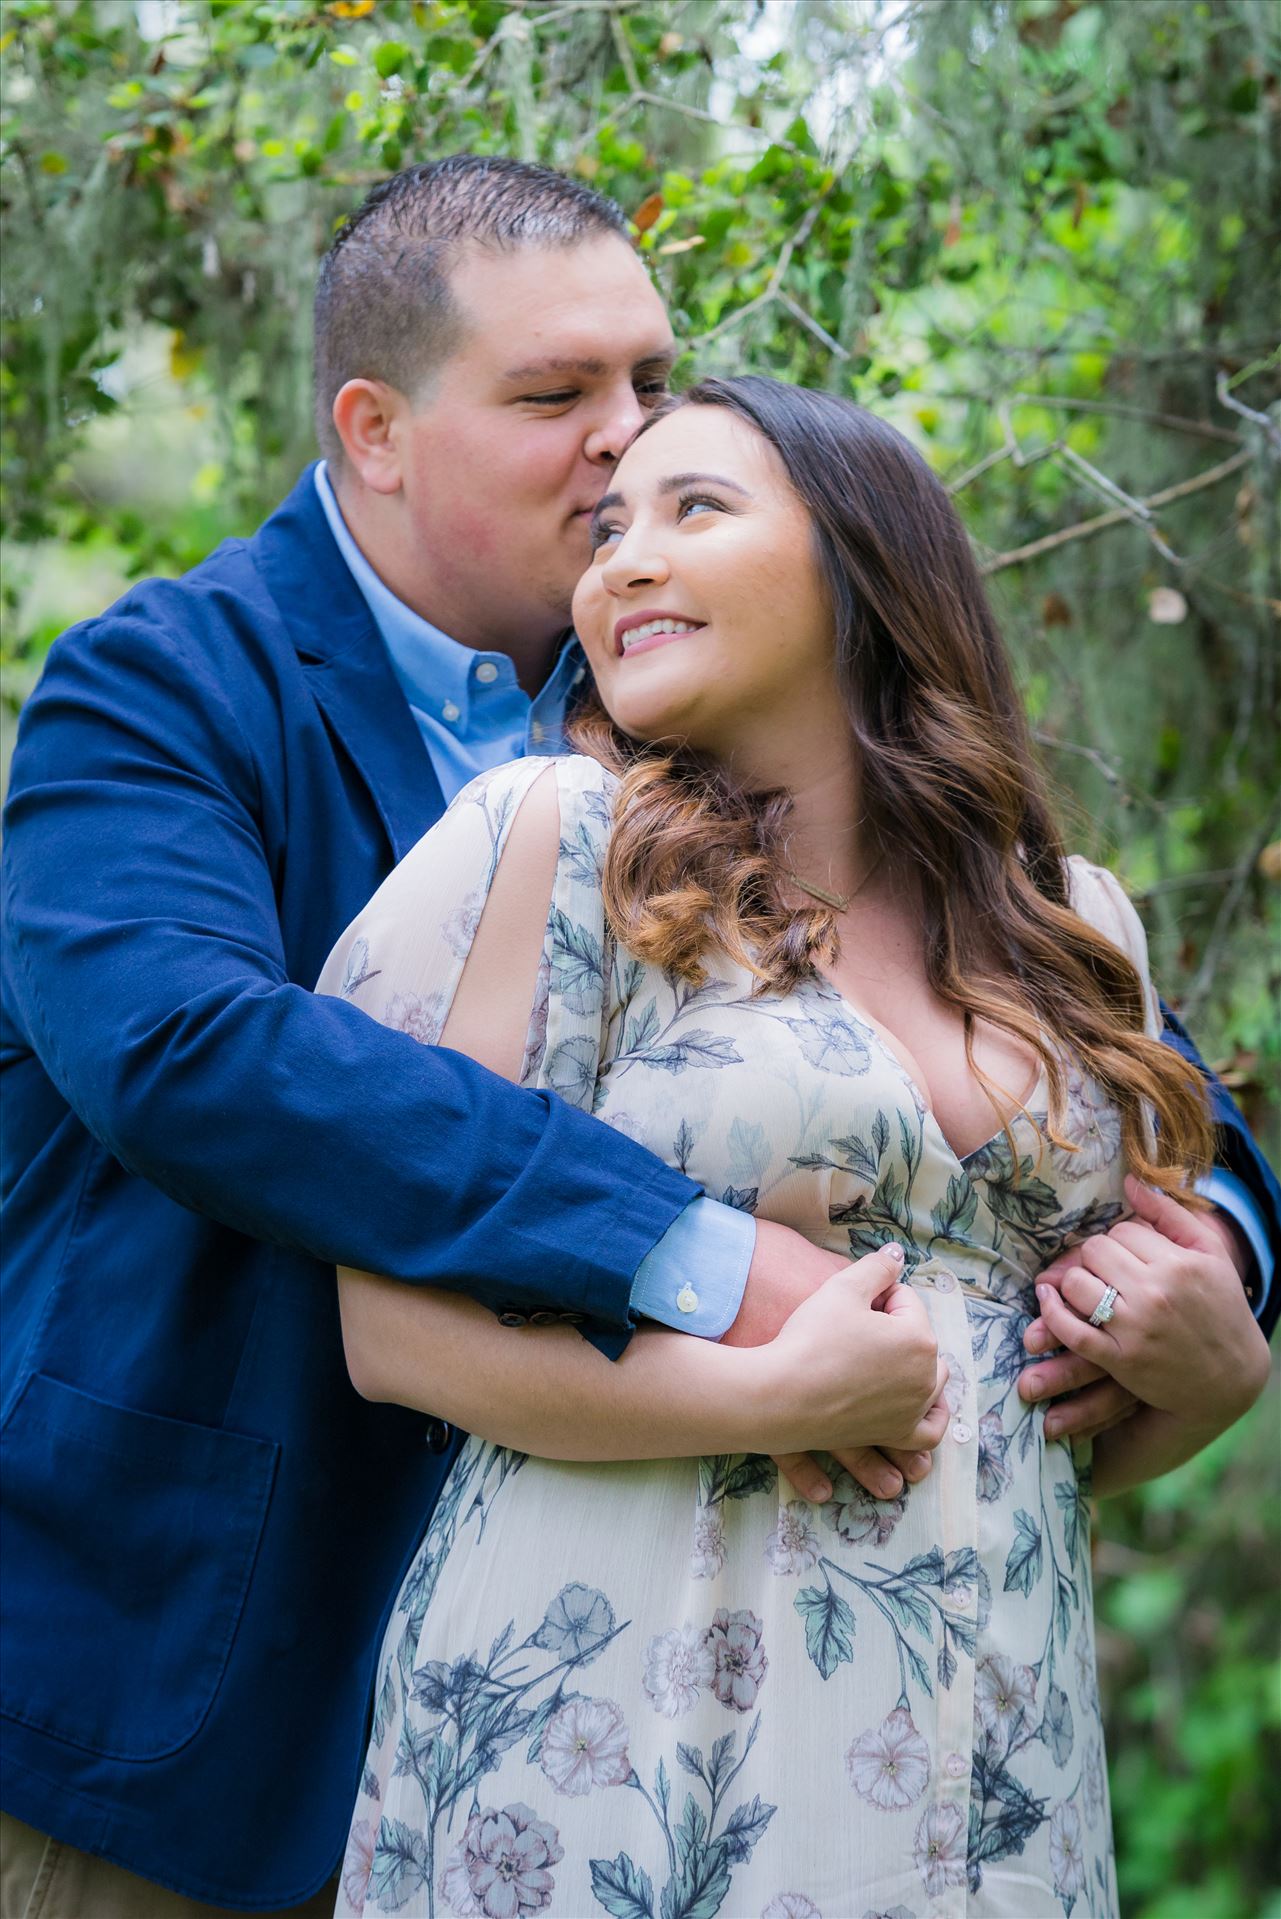 DSC_3152.JPG Los Osos Oaks Nature Reserve Engagement Photography Session by Mirror's Edge Photography in magical forest setting by Sarah Williams